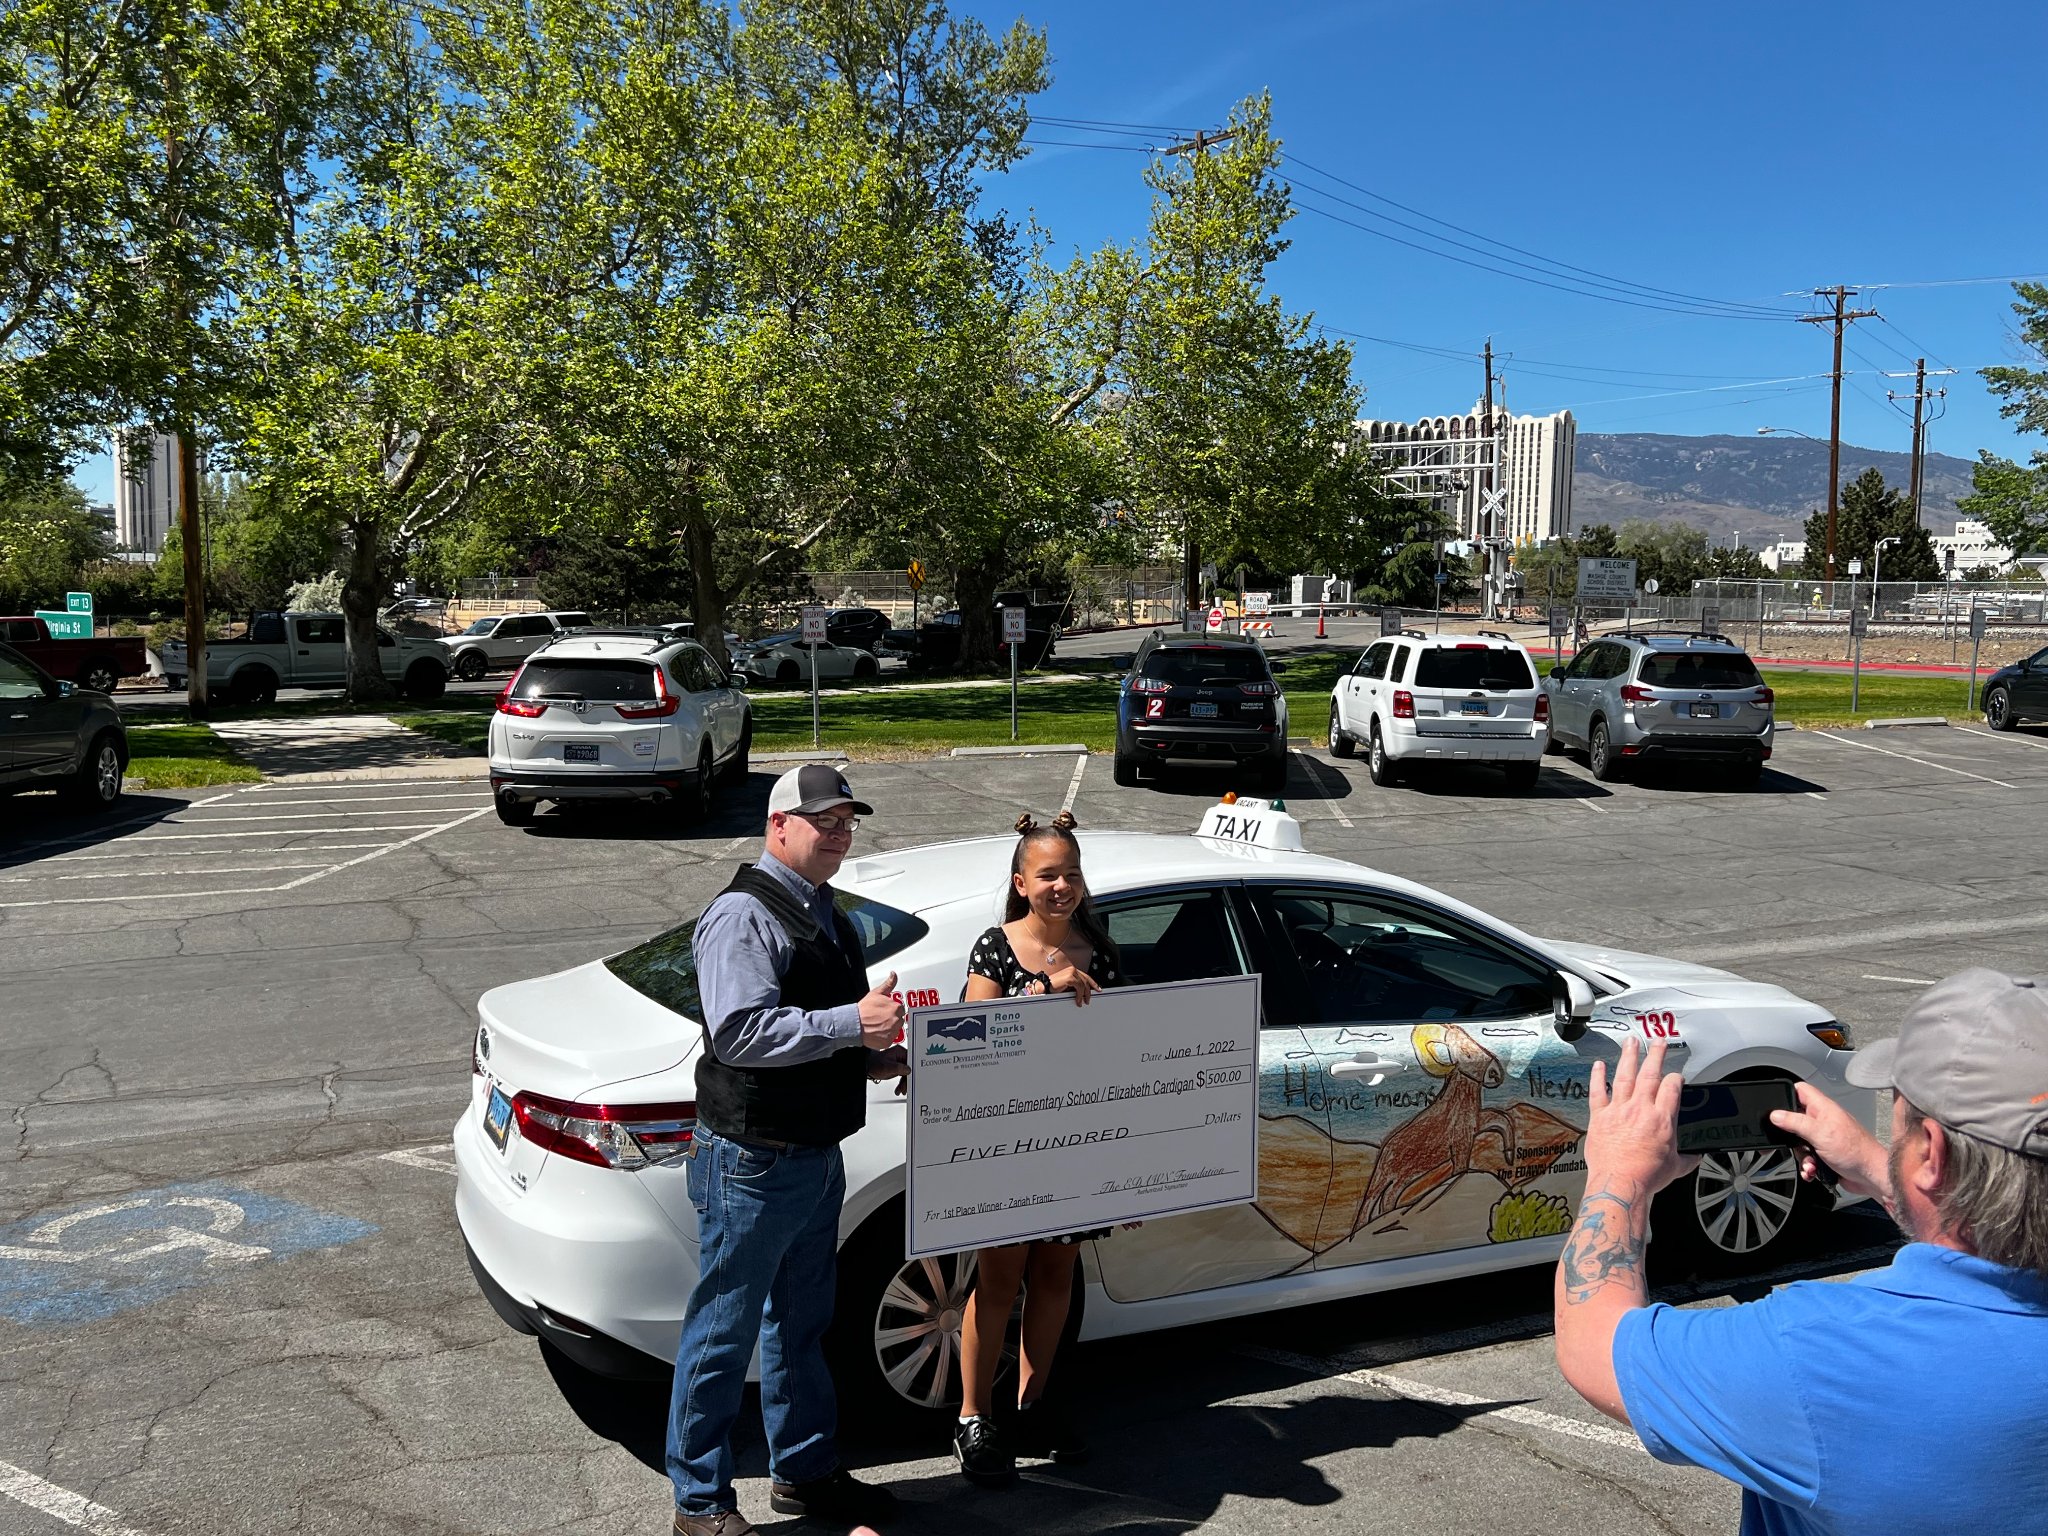 inline image showing a reno taxi with a new design and the winner of the design receiving a prize